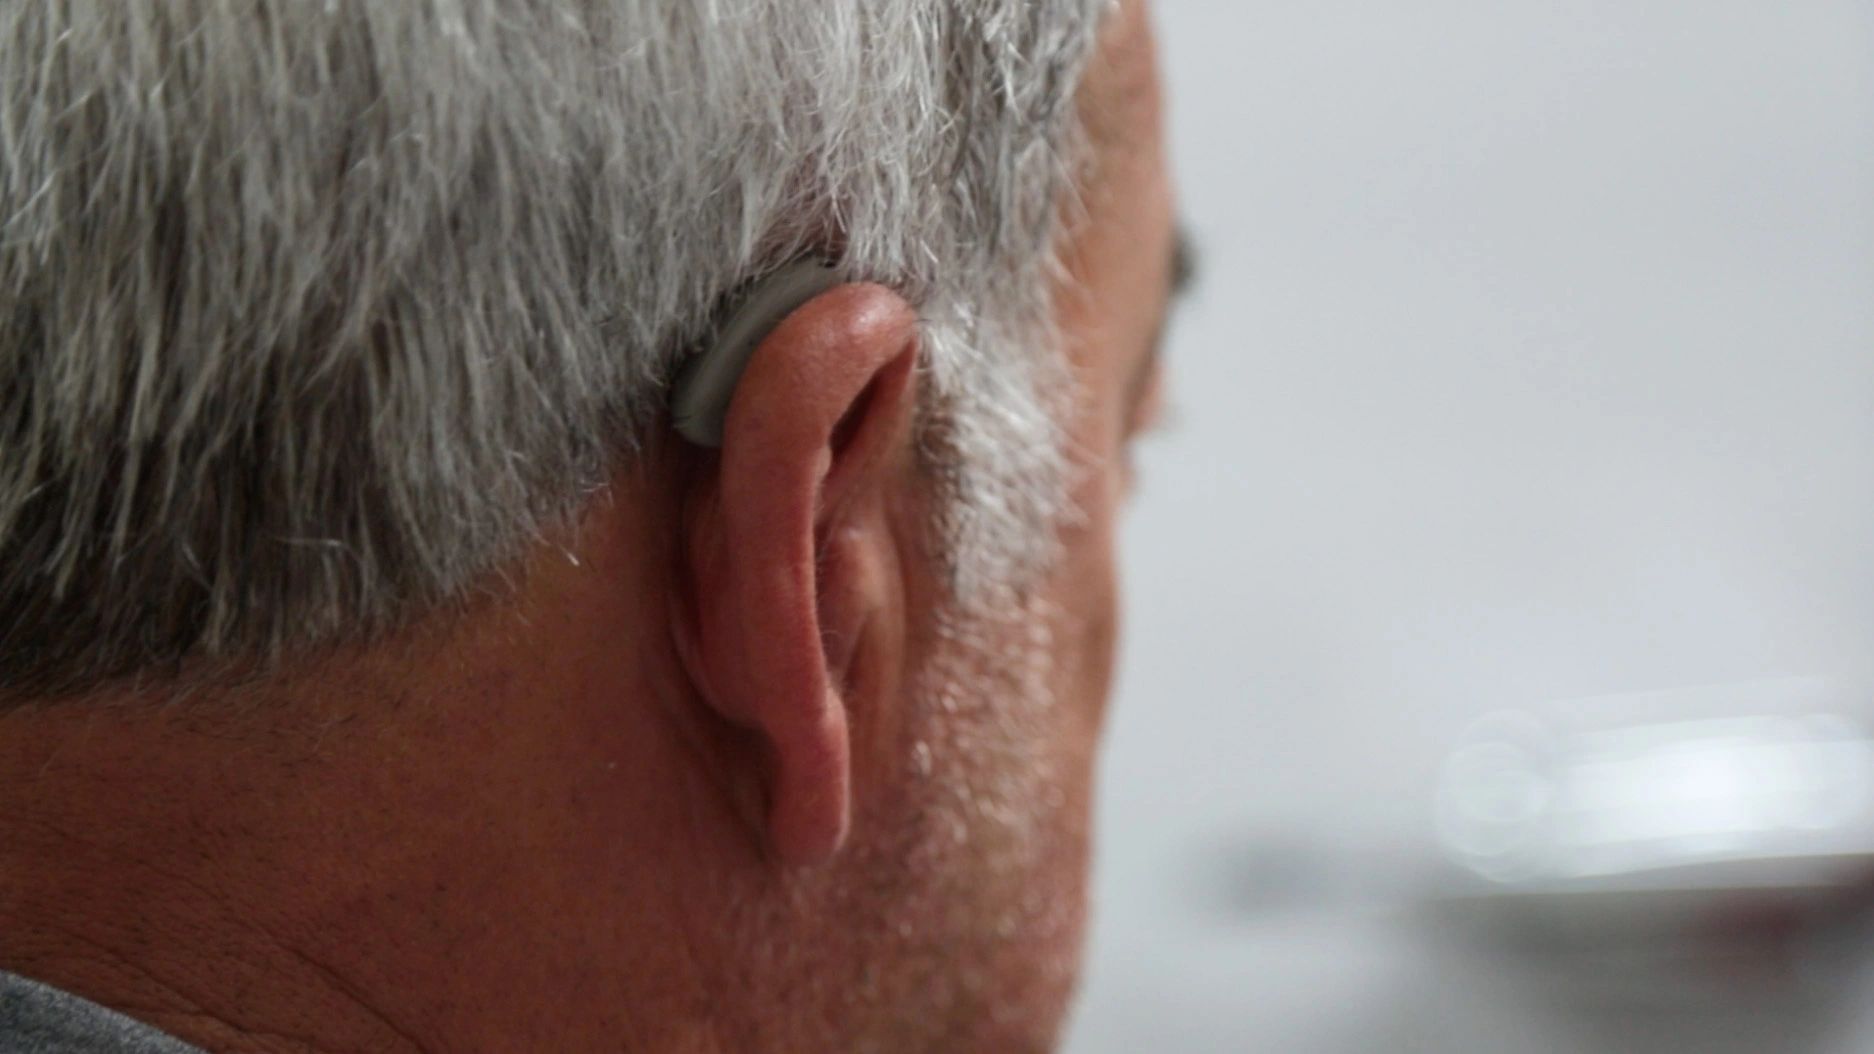 A patient wearing a discreet hearing aid.